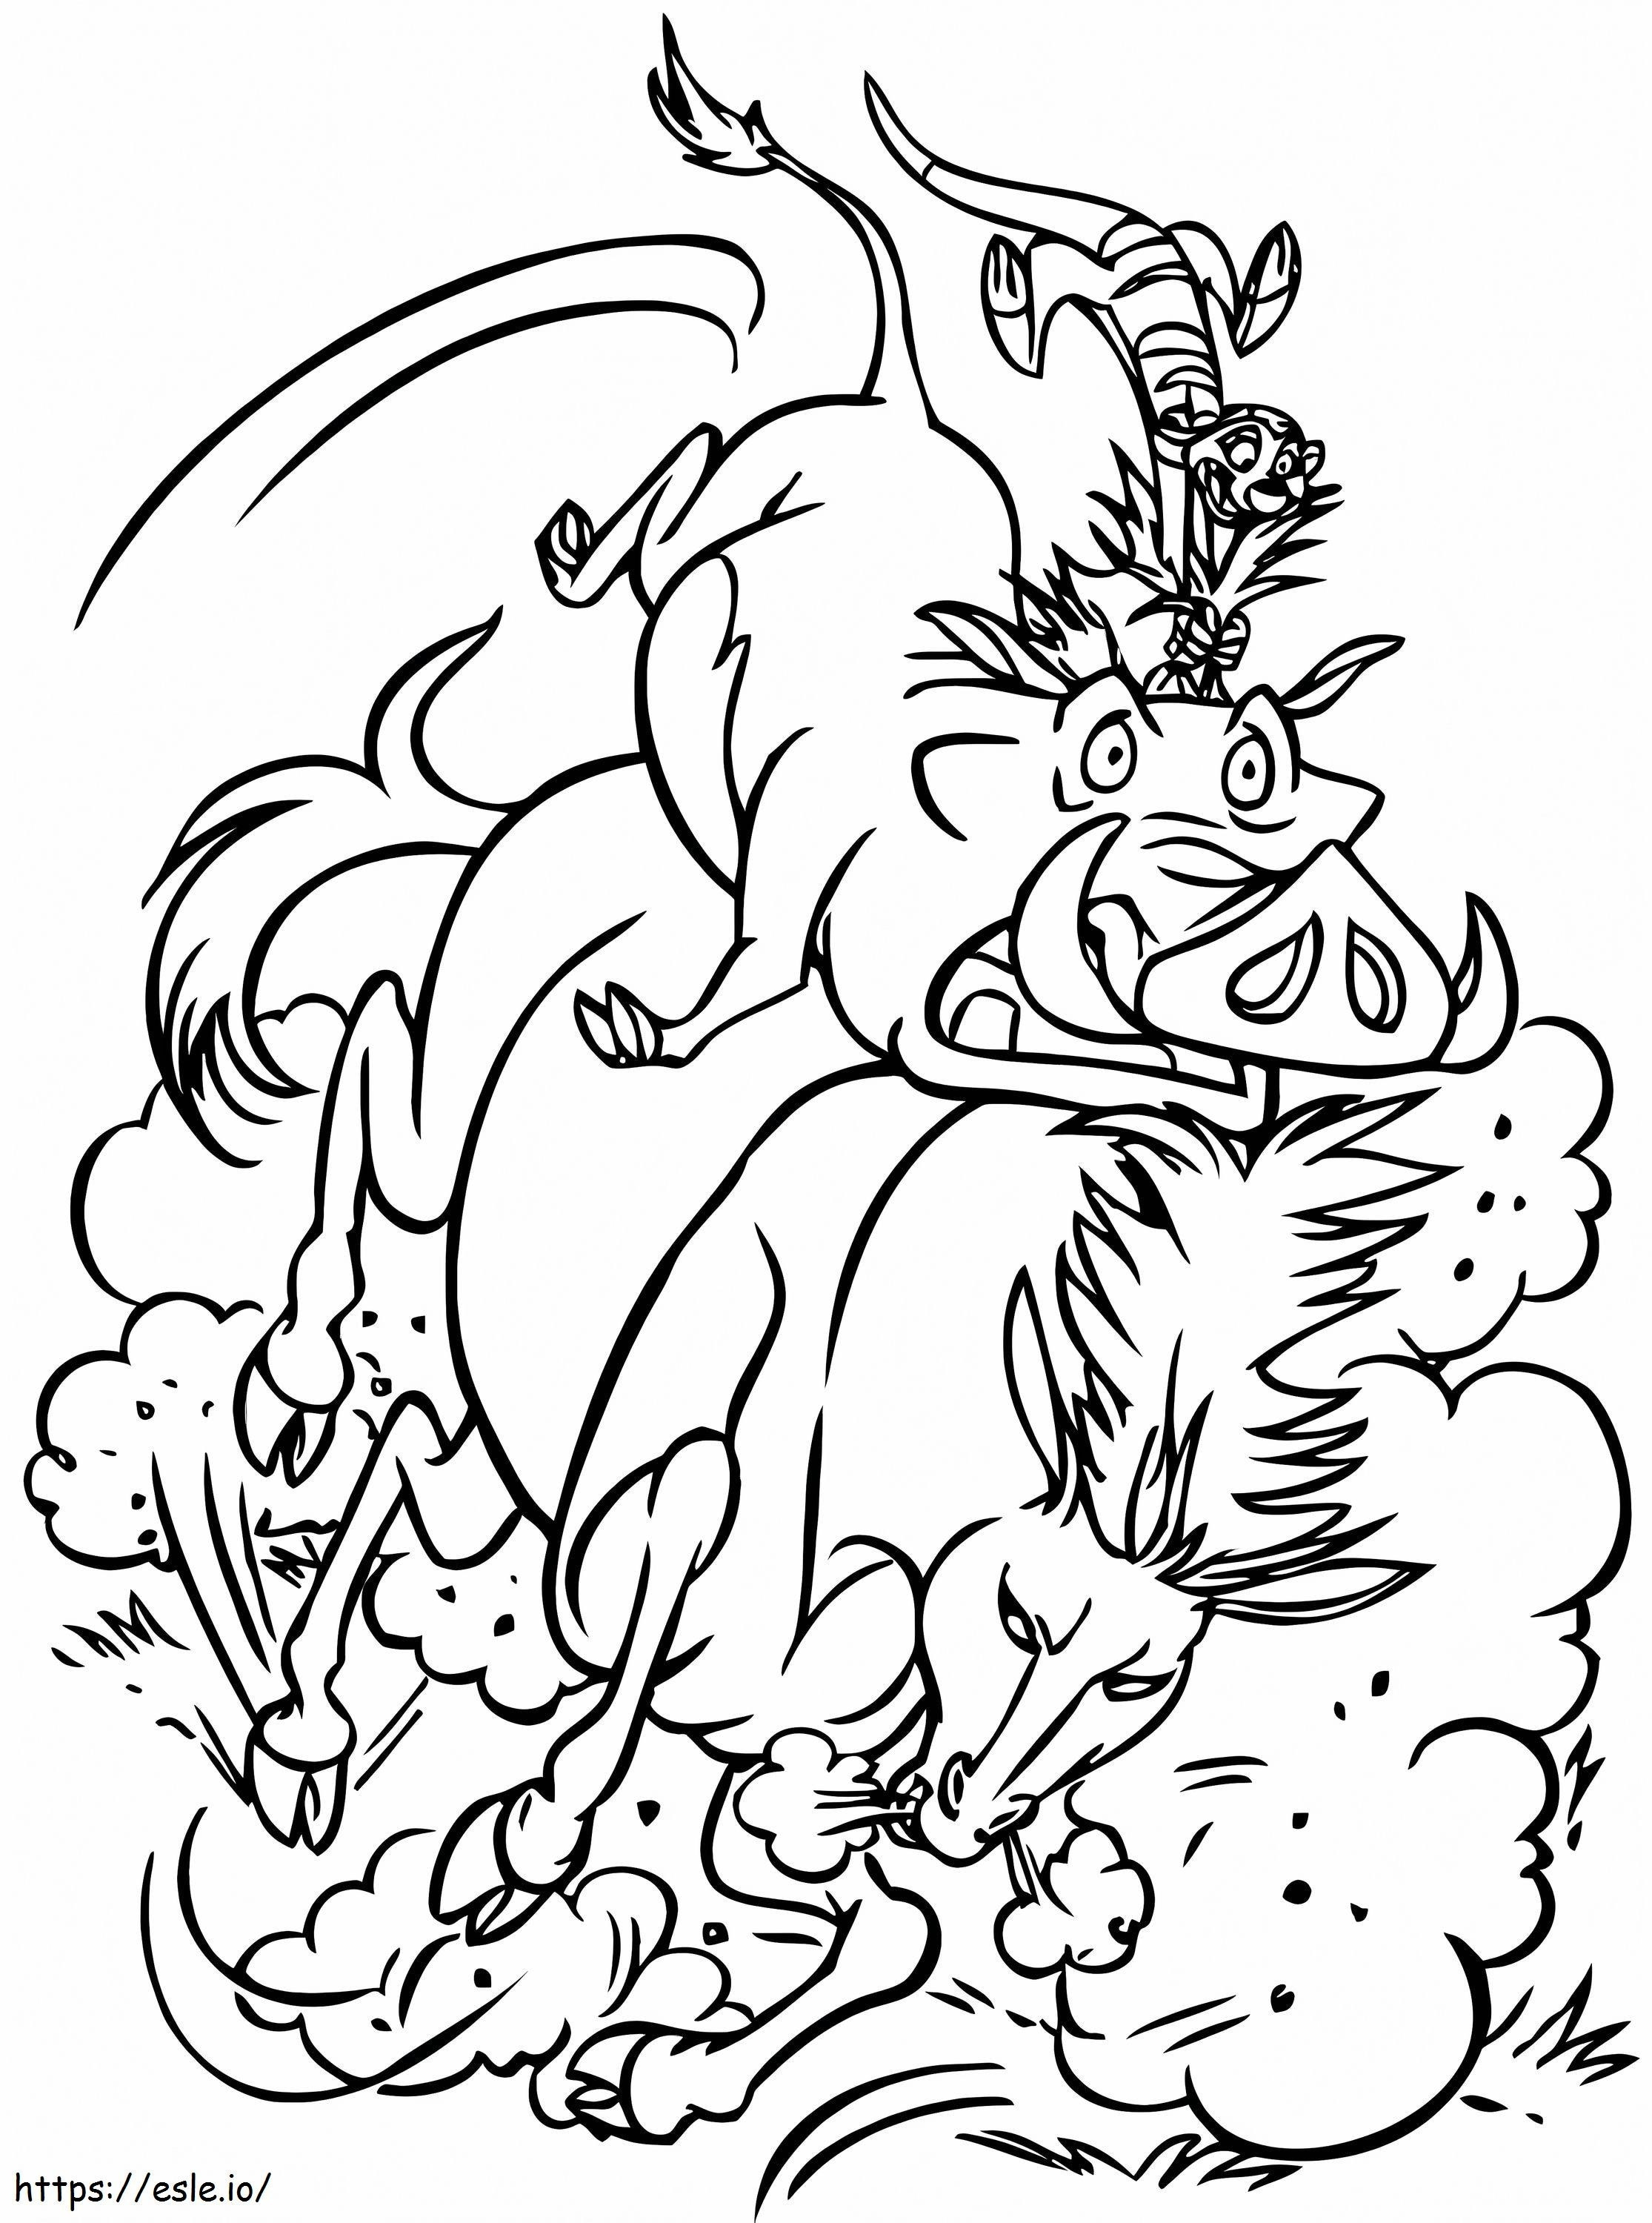 1562726644 Pumbaa N Timon Riding Horse A4 coloring page